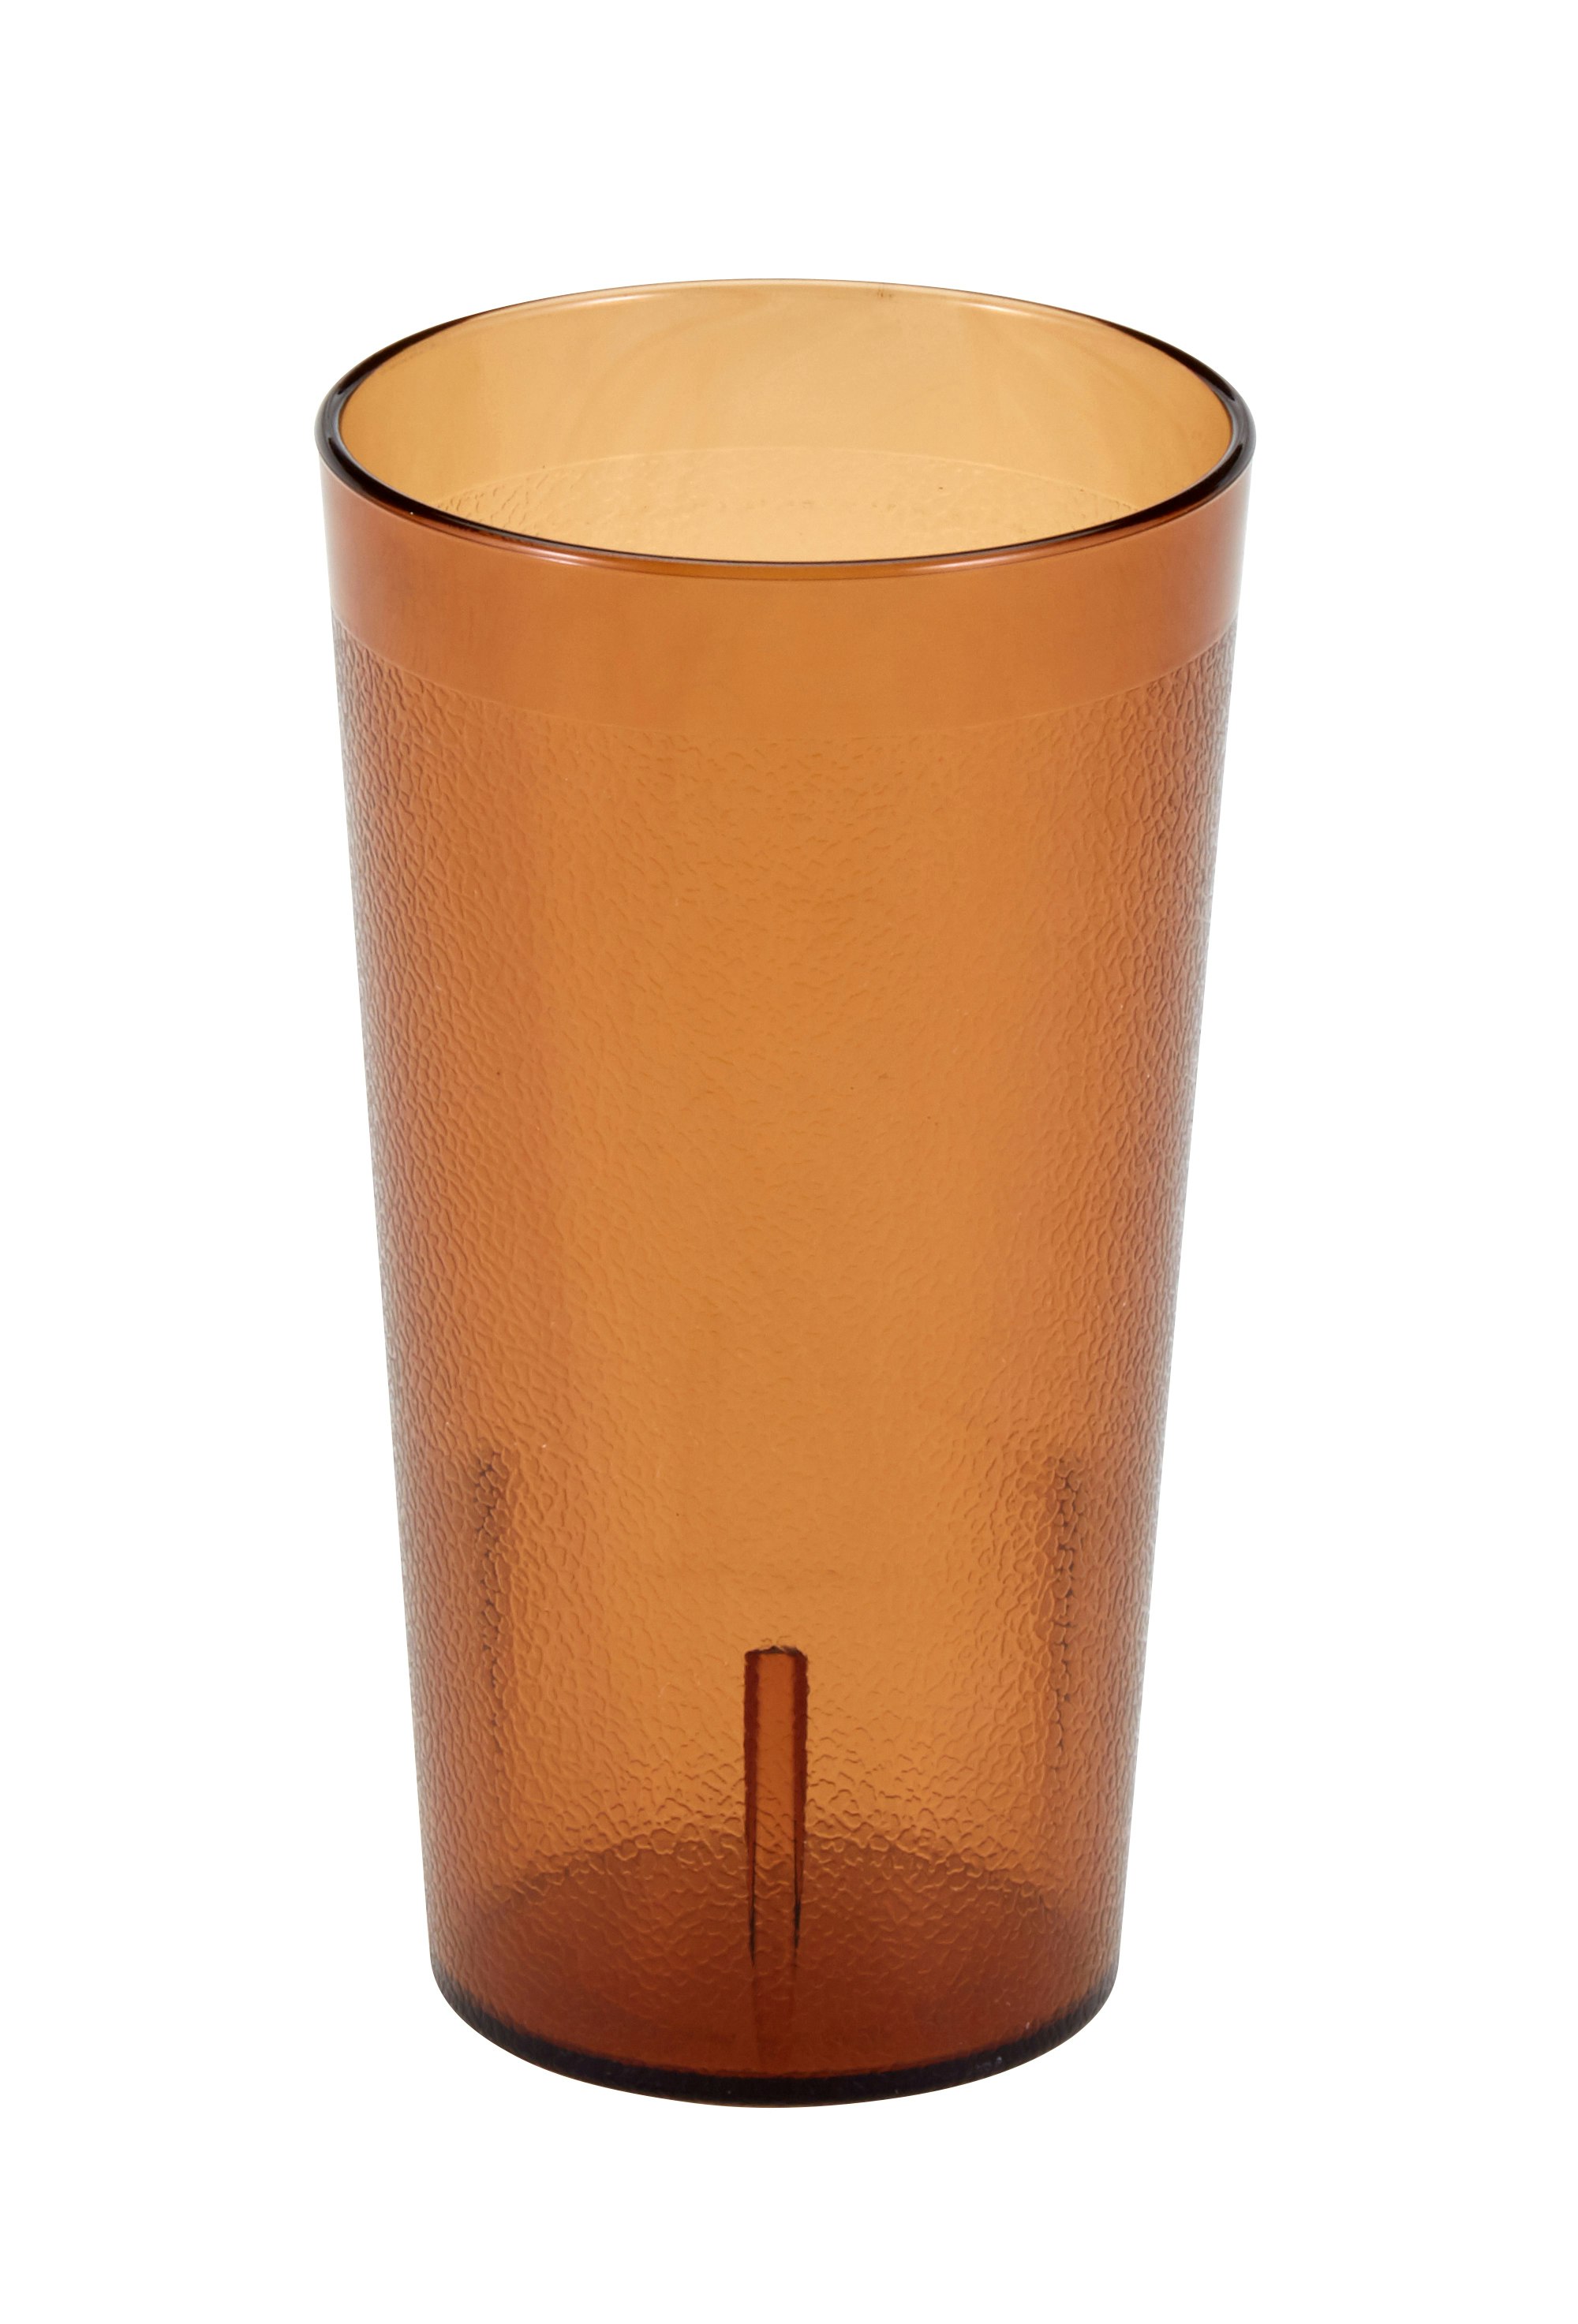 Amber Details about   Cambro Colorware 16 oz Plastic Tumblers Lot of 4-1600P Beverage Cup 